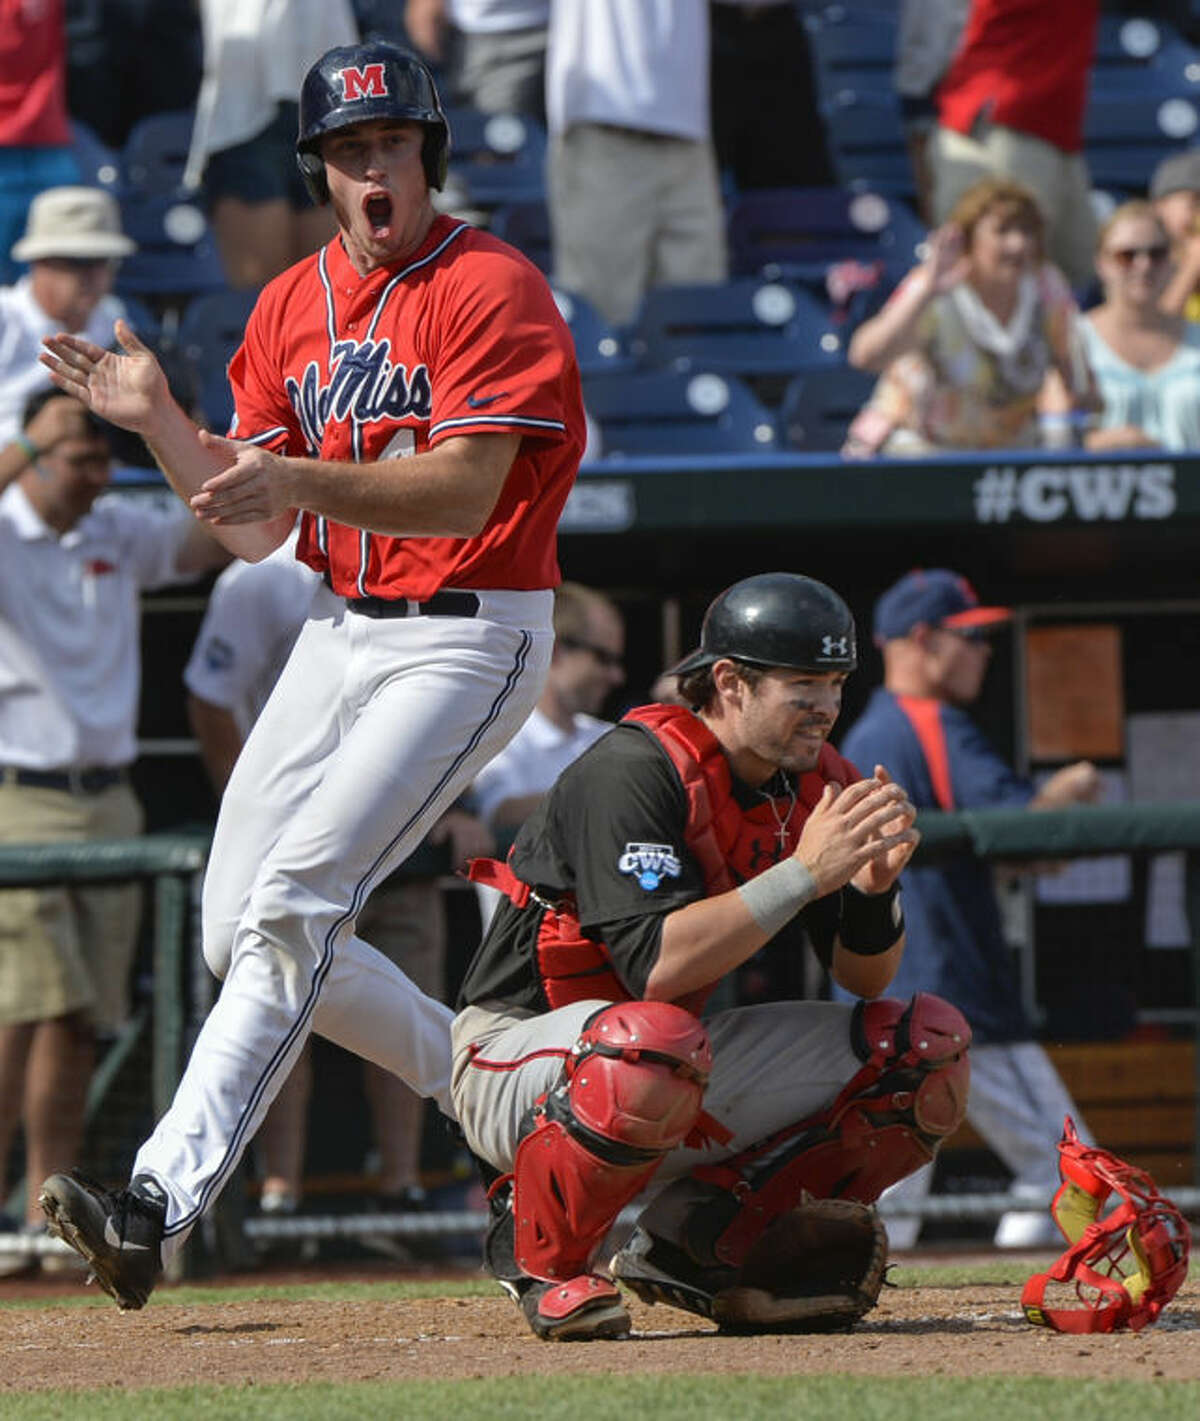 Mississippi's Aaron Greenwood, who scored the winning run against Texas Tech on a single by John Gatlin, celebrates left, as Texas Tech catcher Hunter Redman (5) crouches dejected, following an NCAA baseball College World Series elimination game in Omaha, Neb., Tuesday, June 17, 2014. (AP Photo/Ted Kirk)